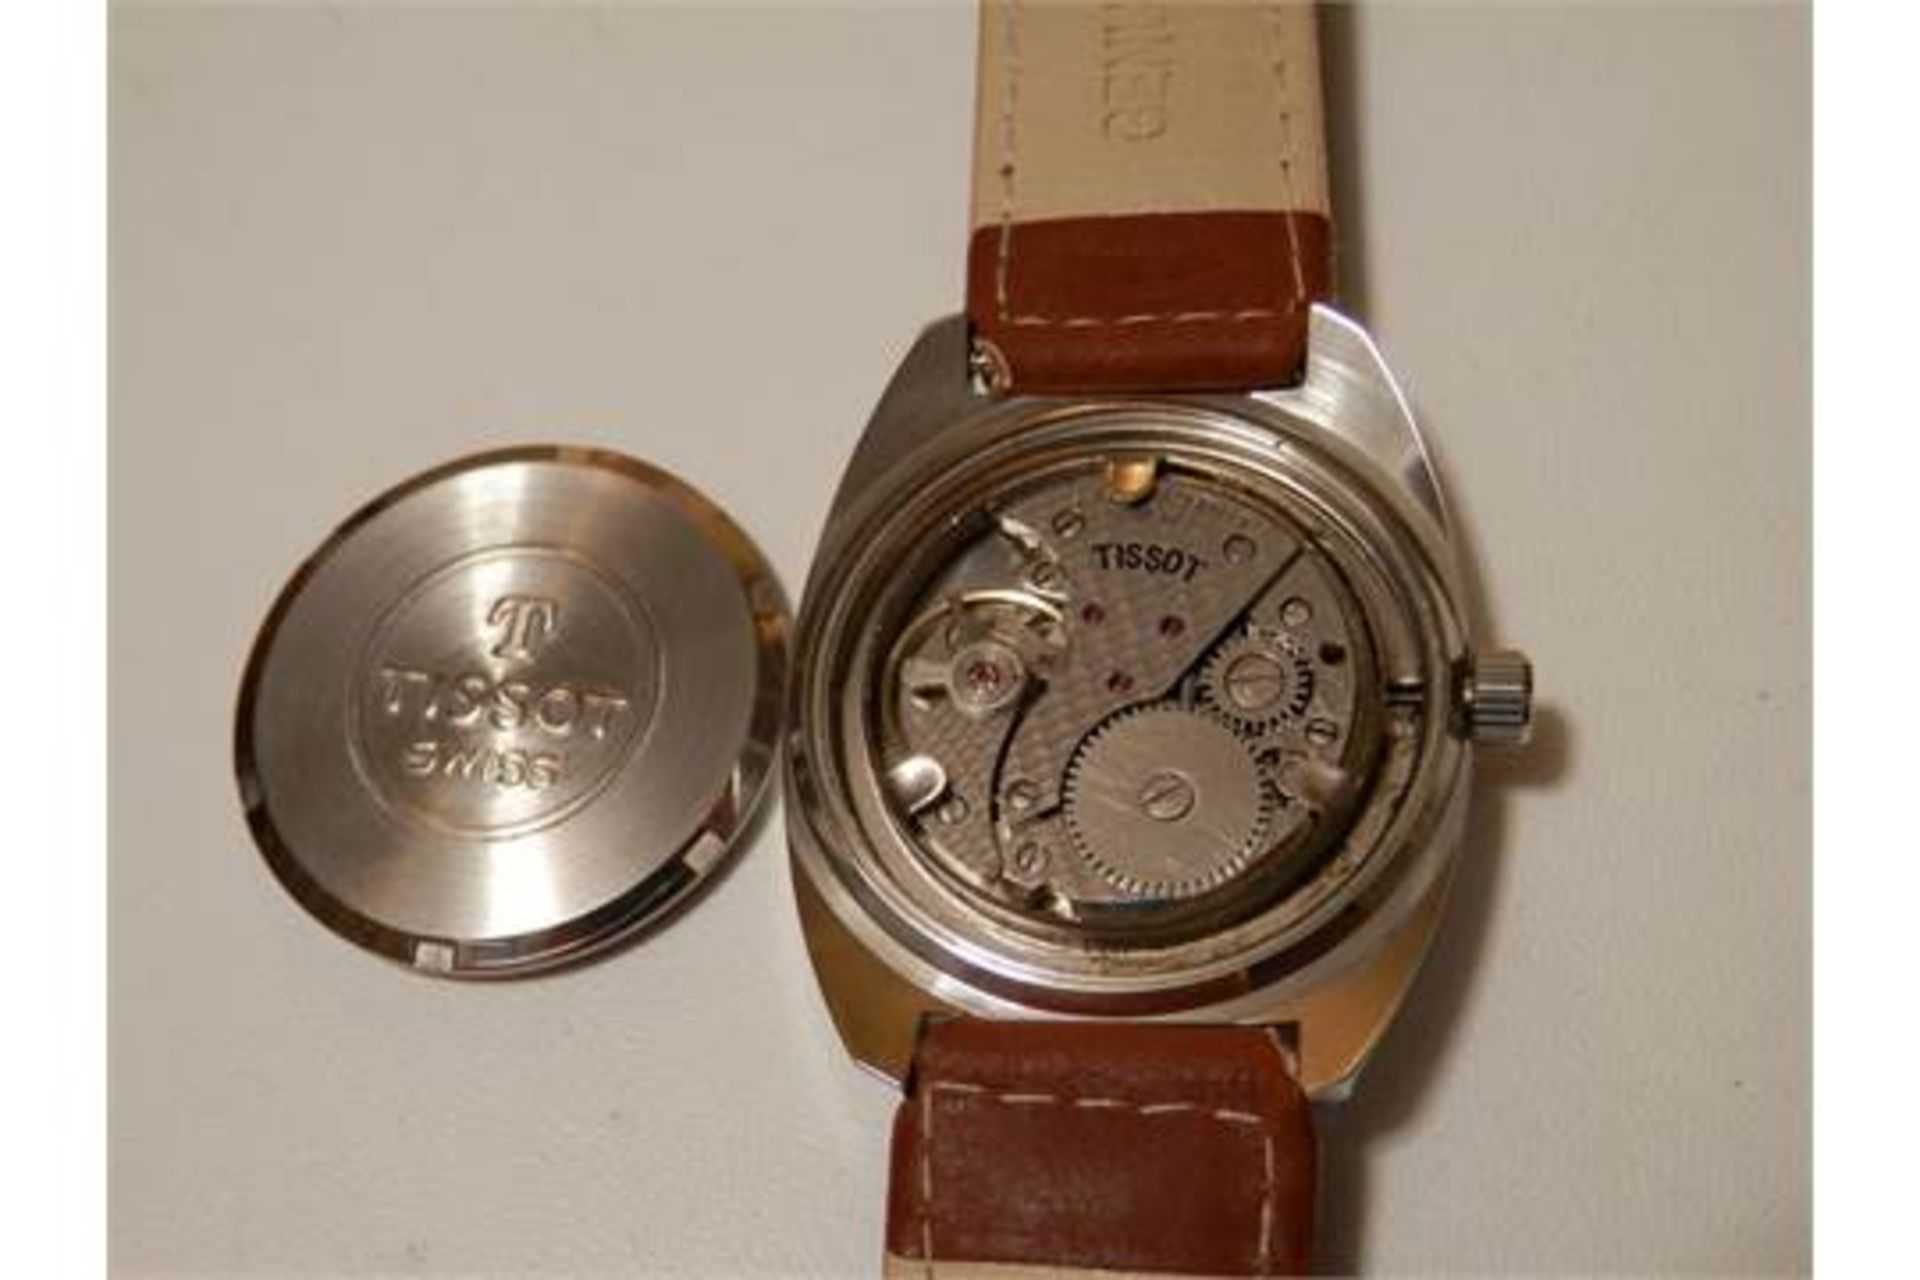 SUPERB GENTS TISSOT SEASTAR, POSSIBLY NEW/OLD STOCK 1970S 17 JEWEL SWISS WATCH (#3 of 3 available) - Image 6 of 10